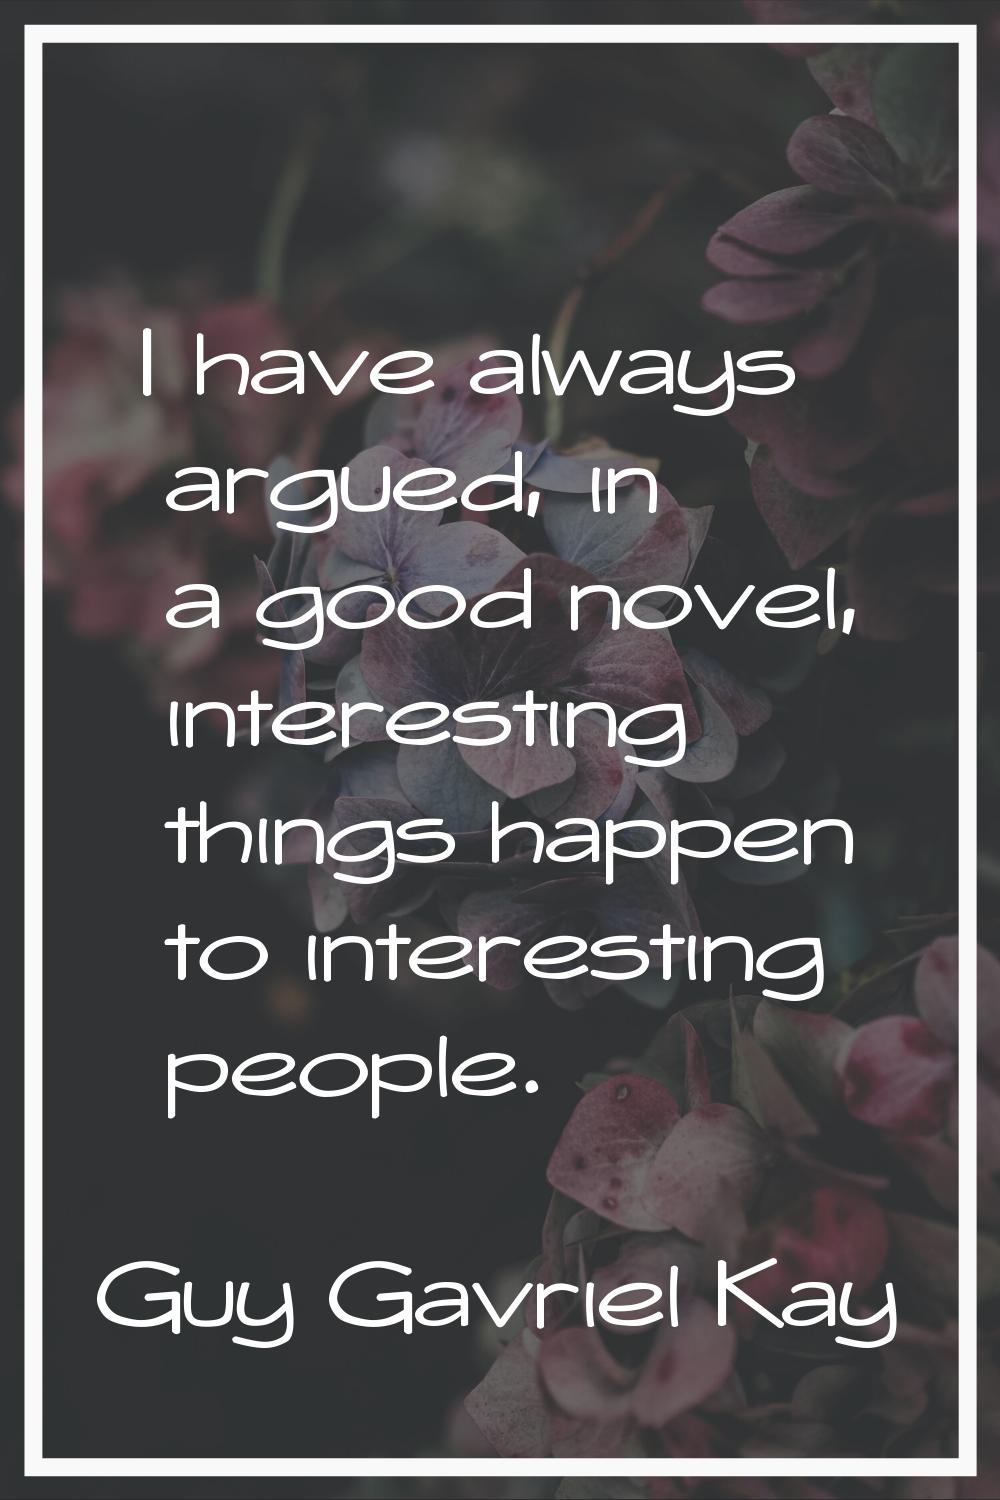 I have always argued, in a good novel, interesting things happen to interesting people.